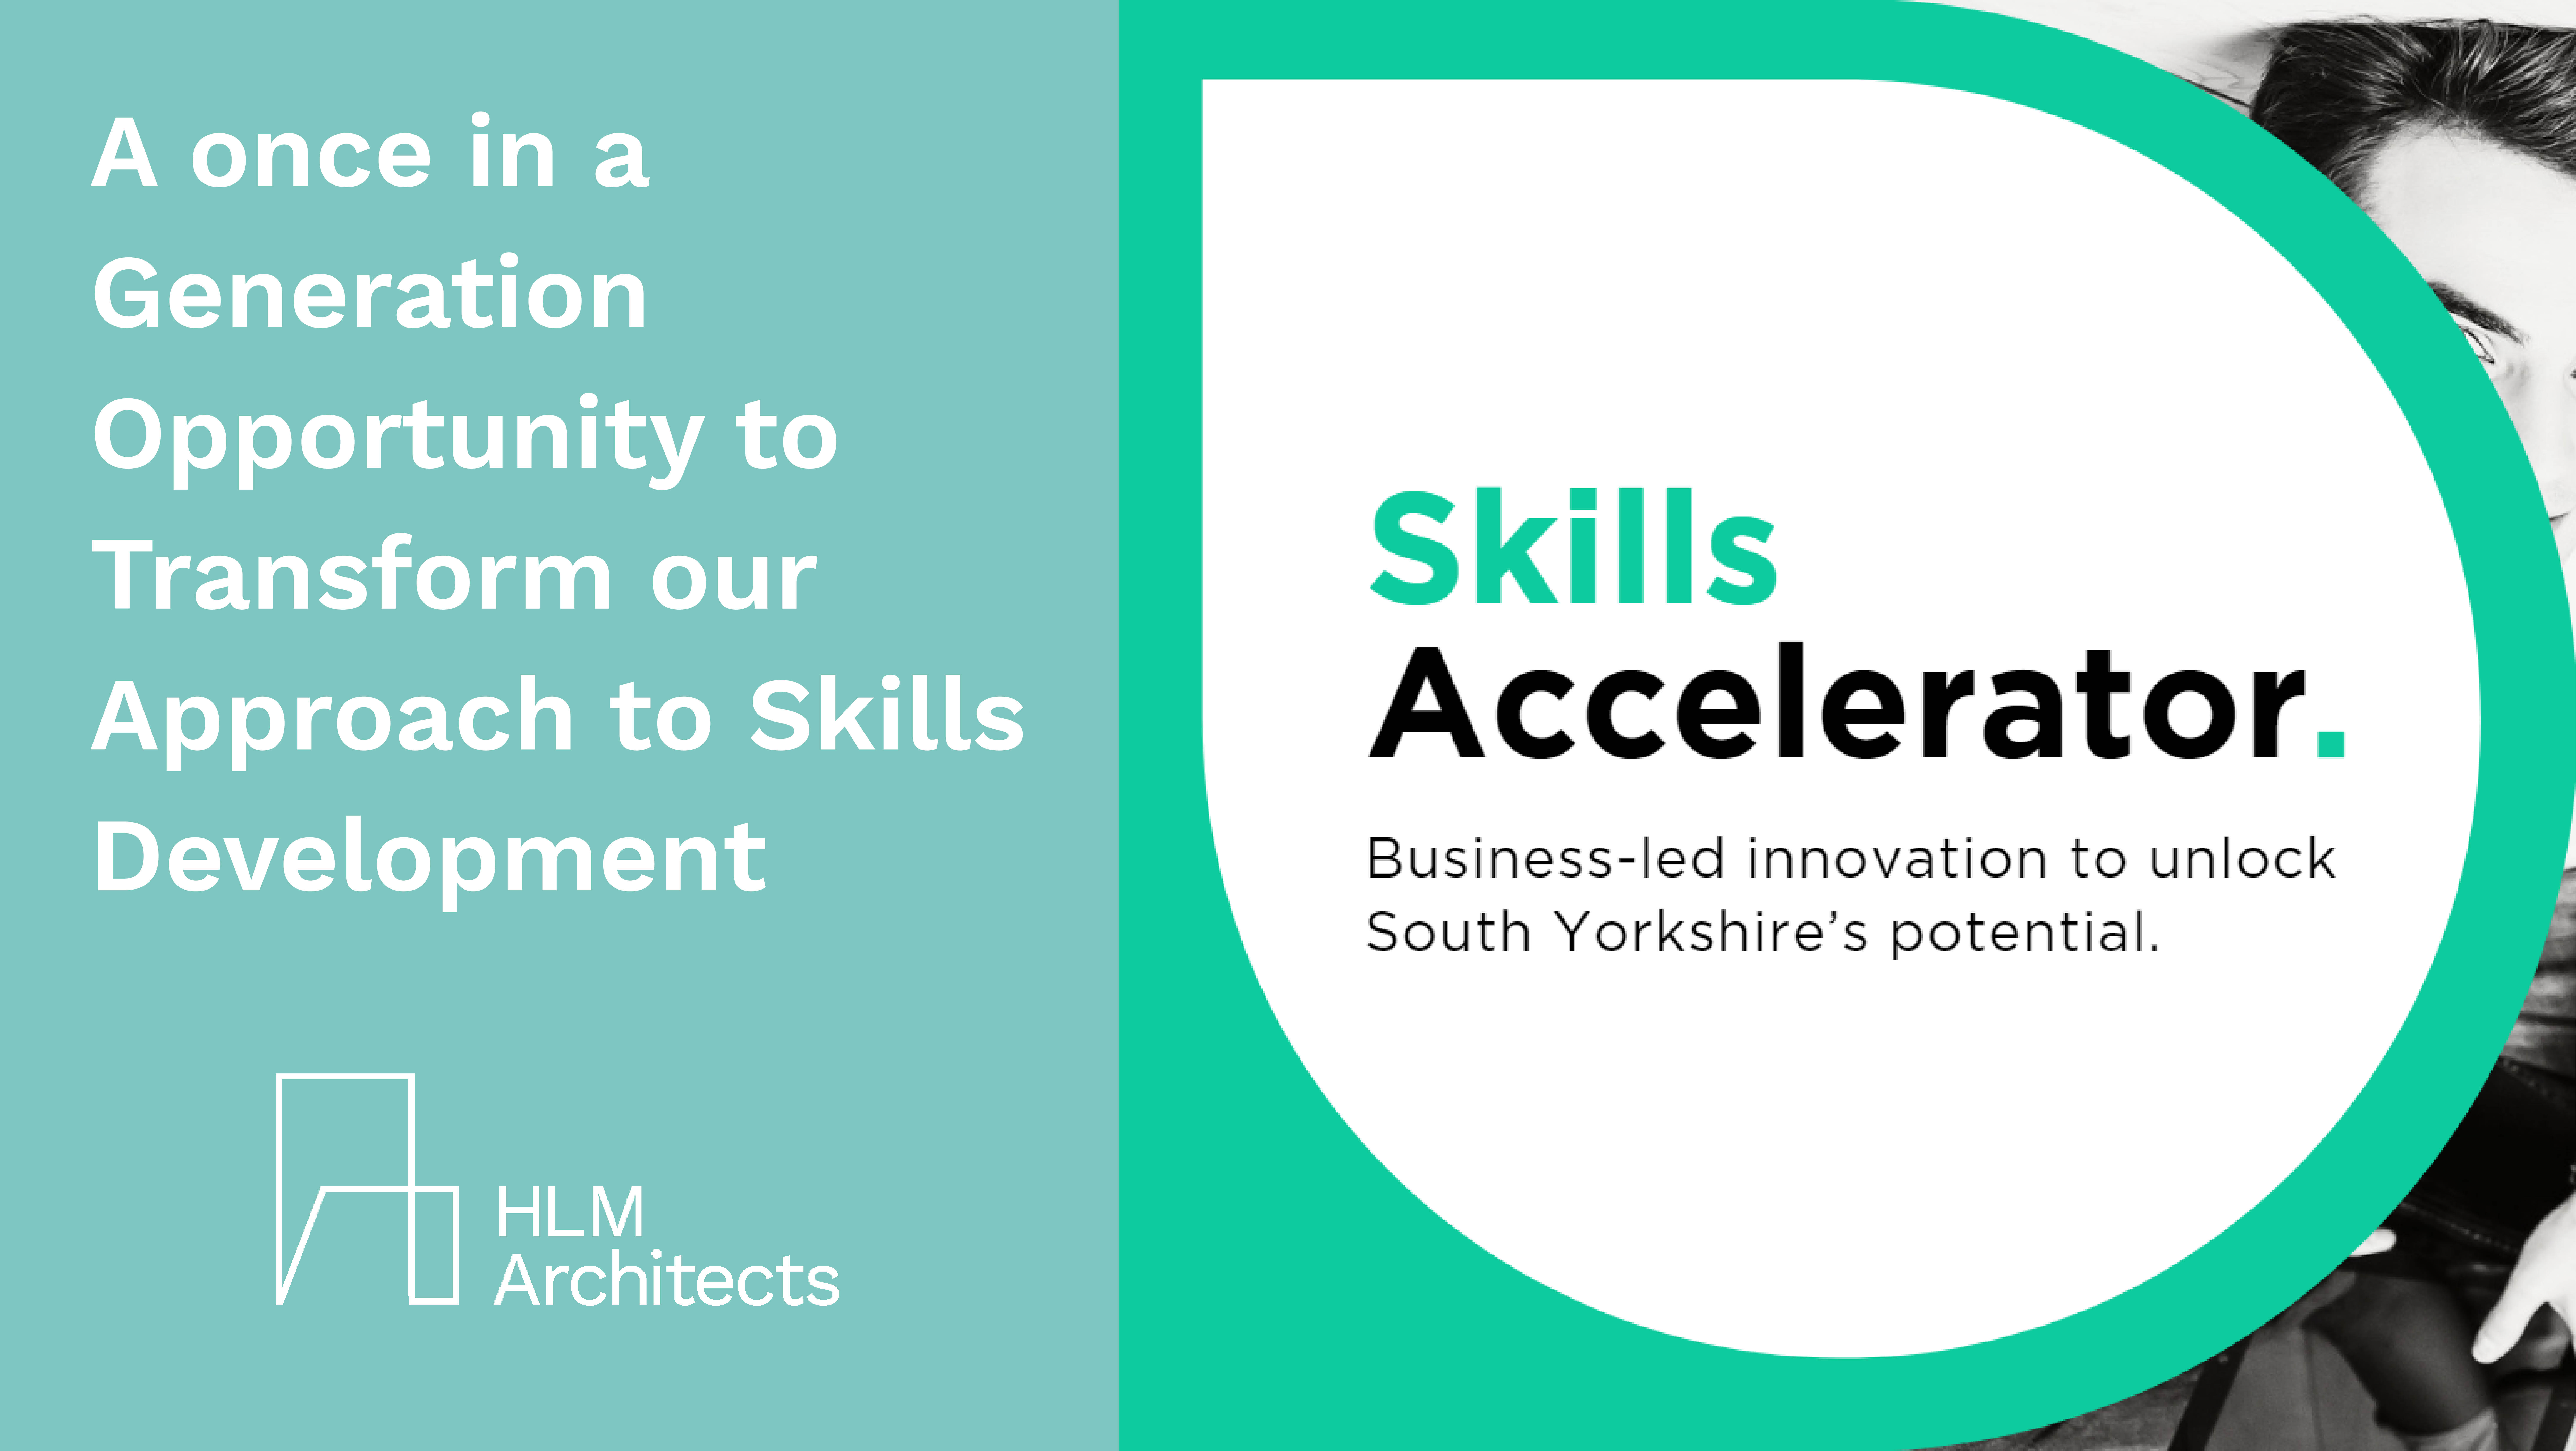 Karen Mosley chair of South Yorkshire Skills Accelerator Board